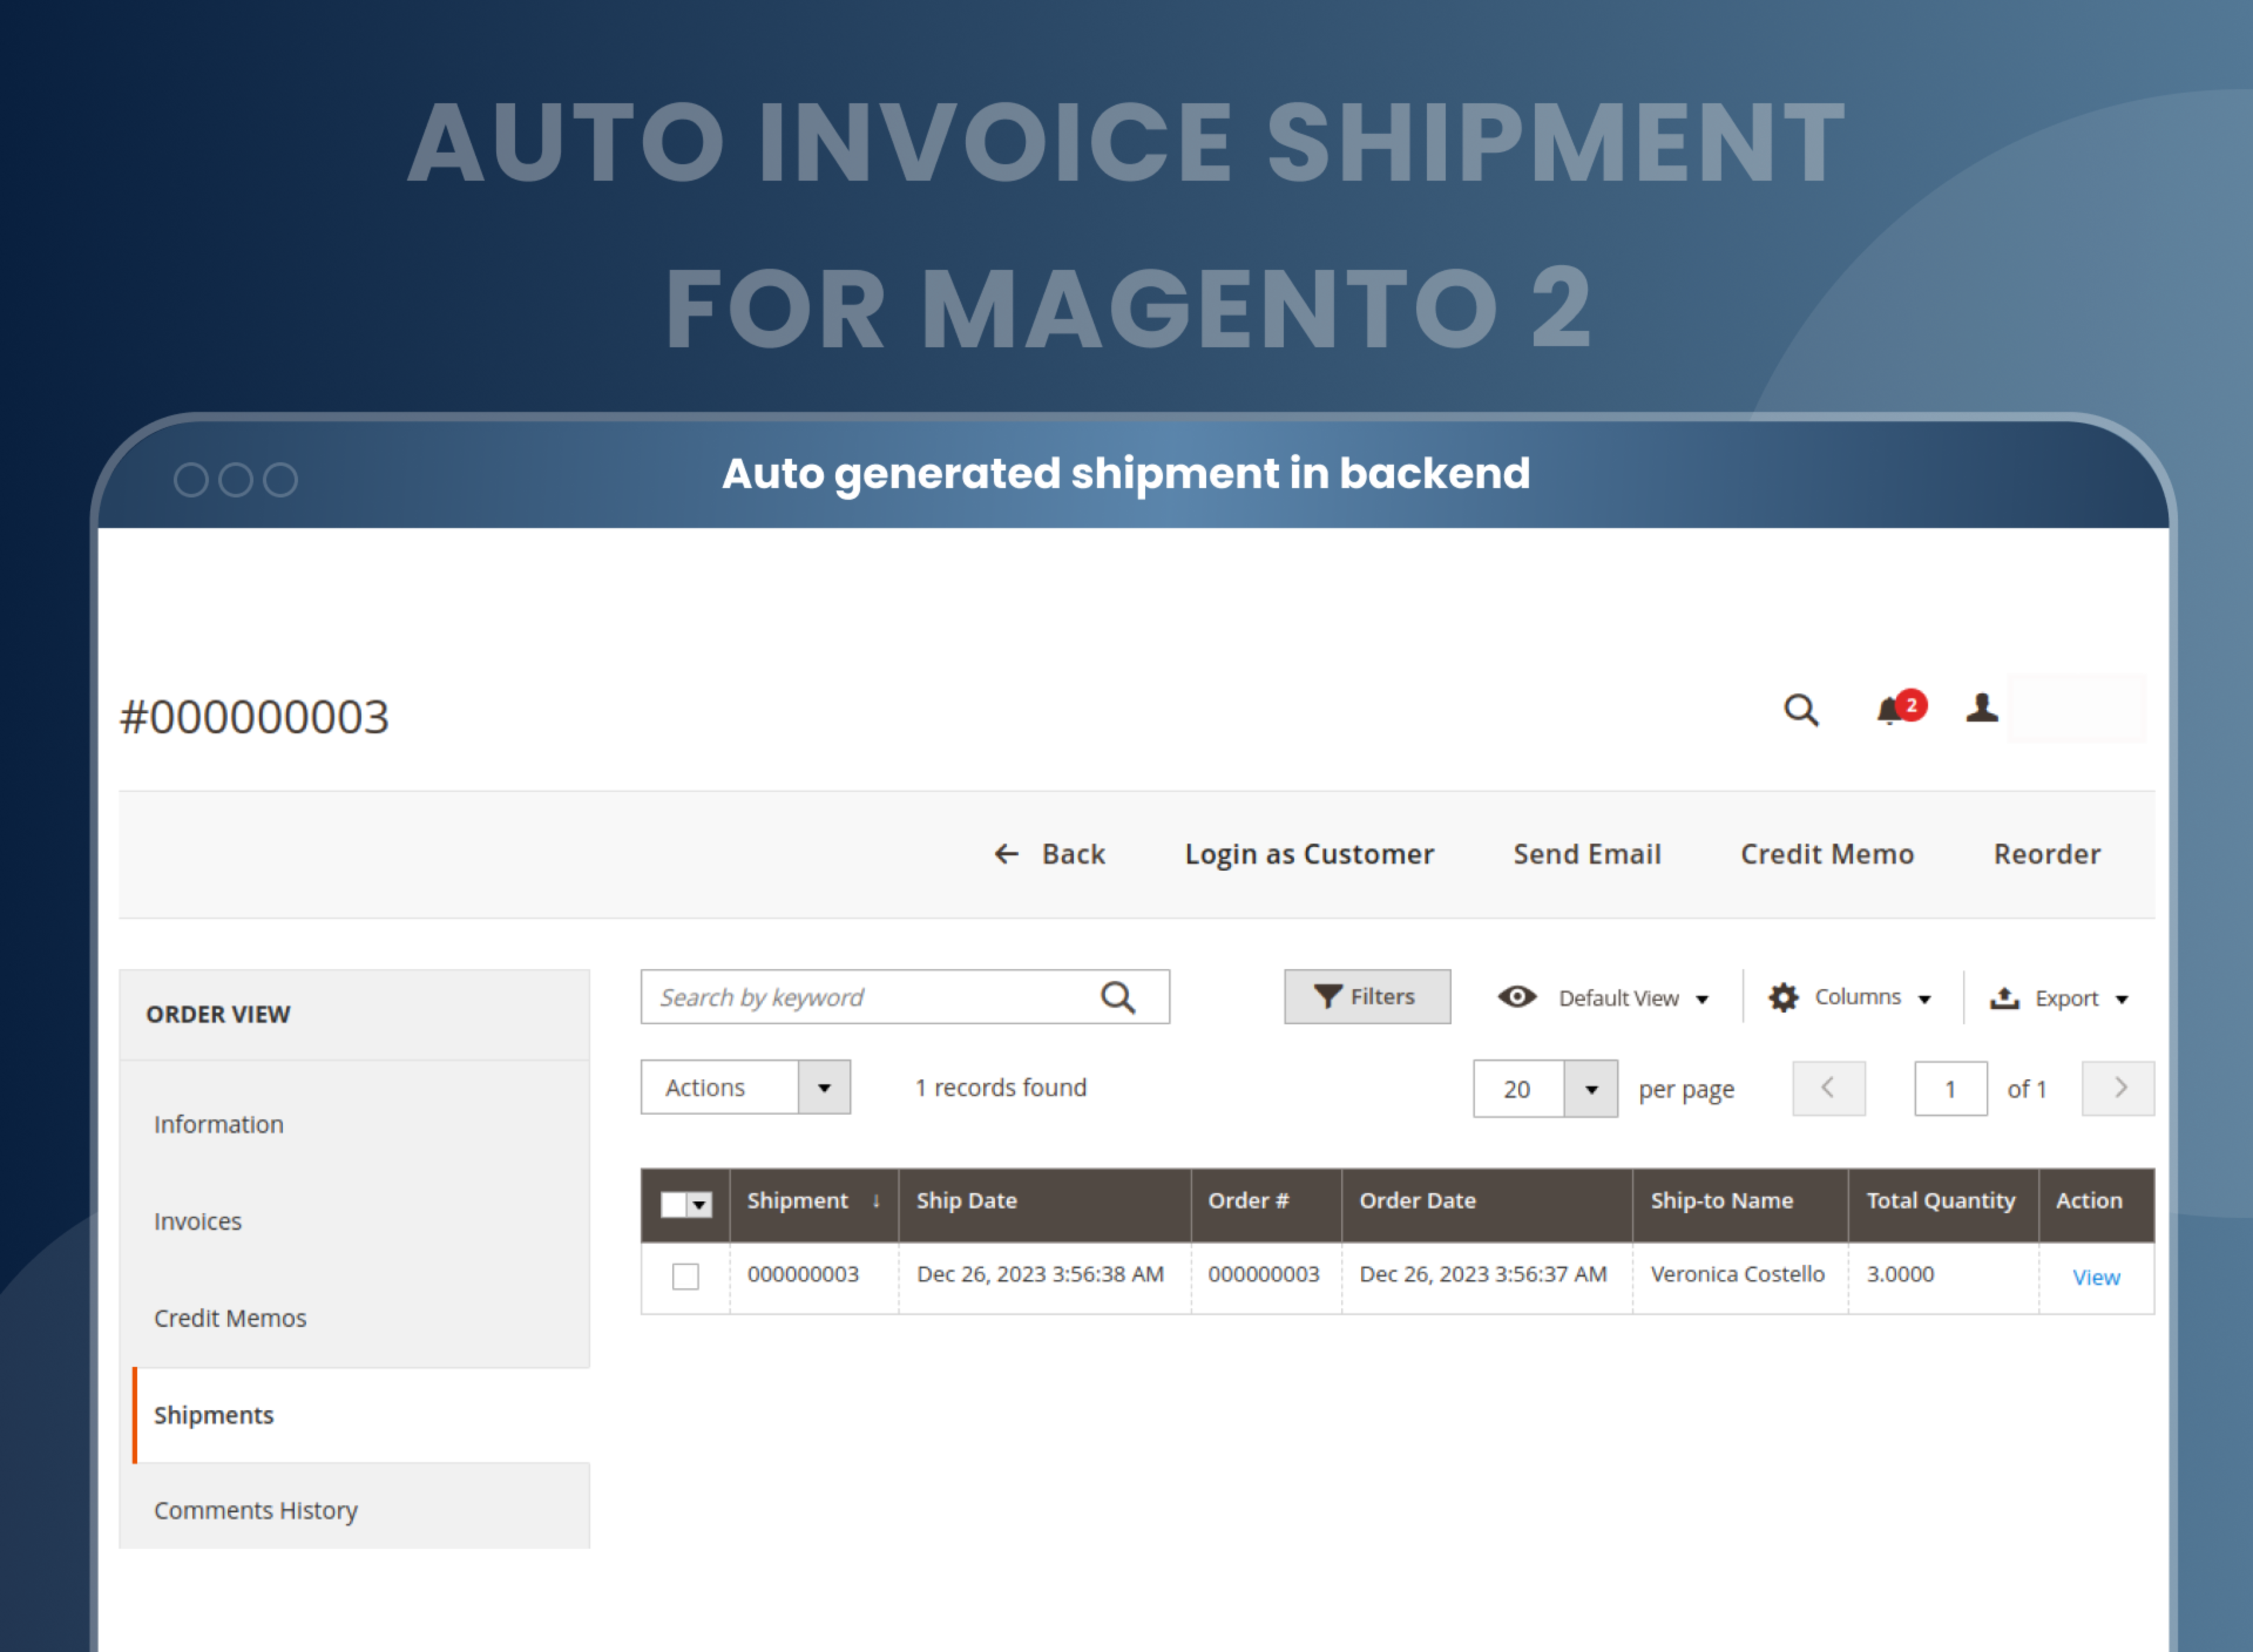  Auto generated shipment in backend